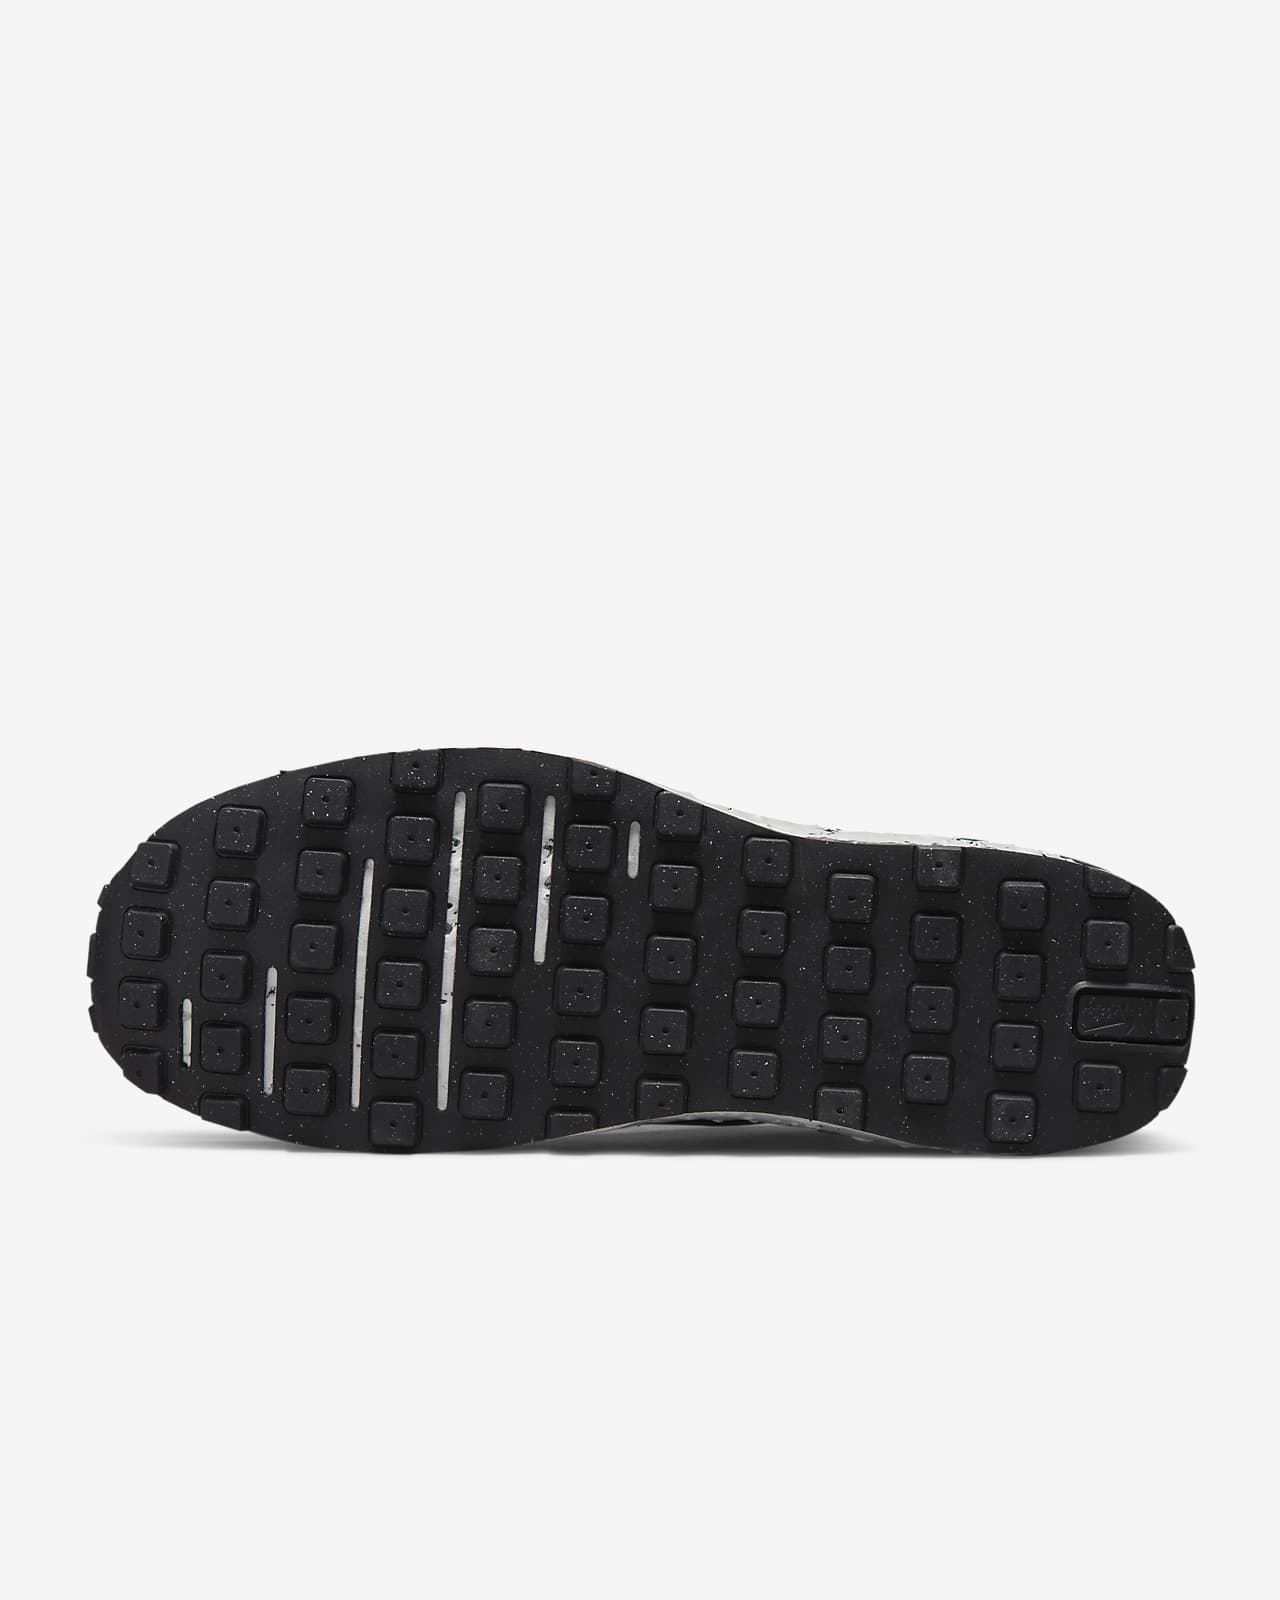 Nike Waffle One Crater Men's Shoes